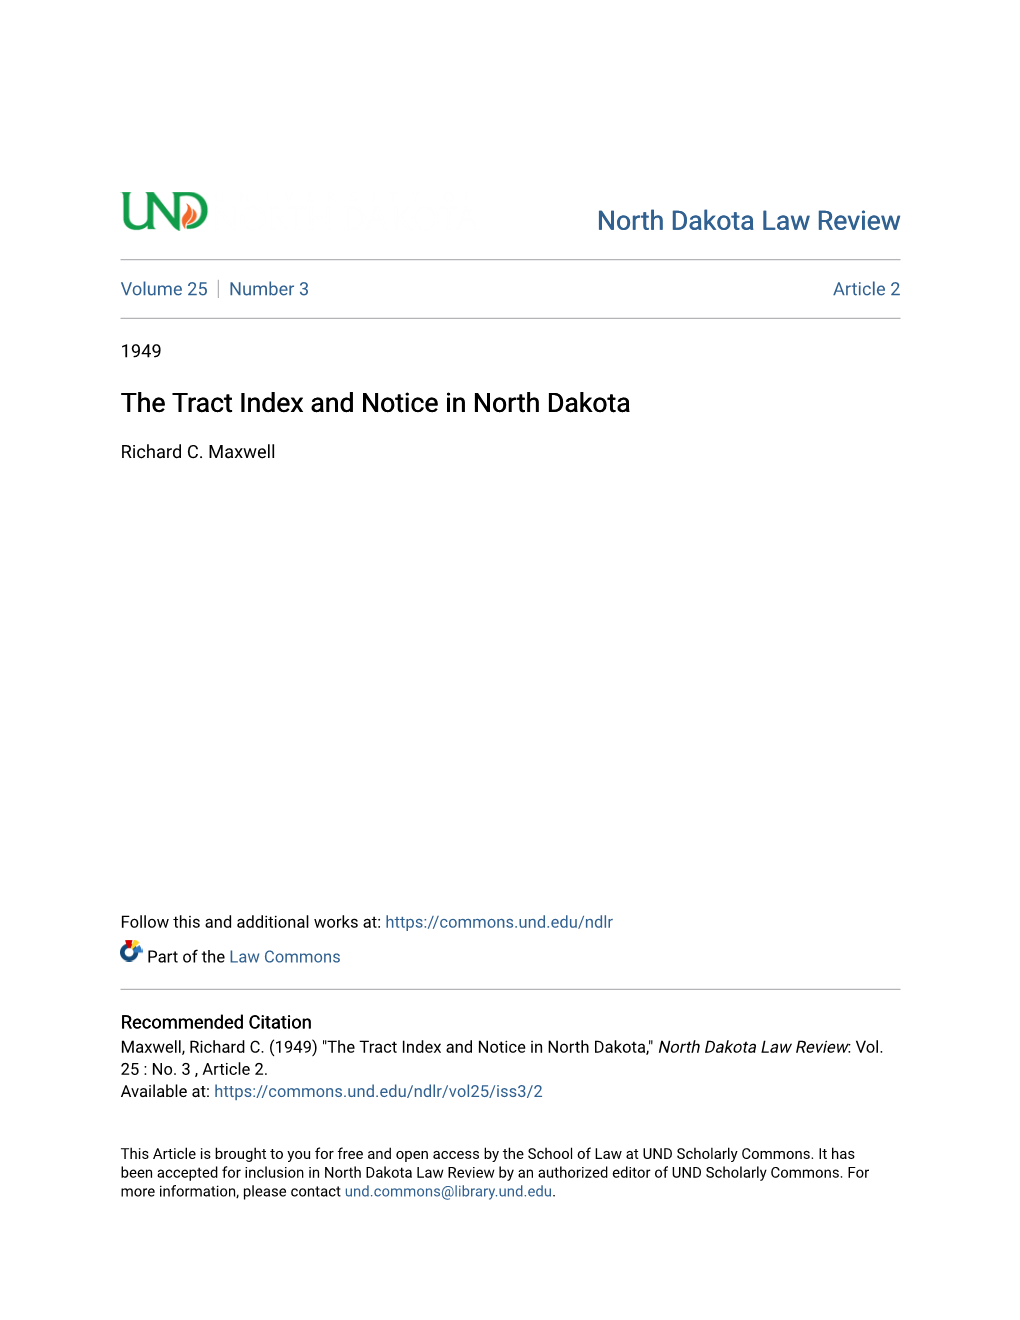 The Tract Index and Notice in North Dakota